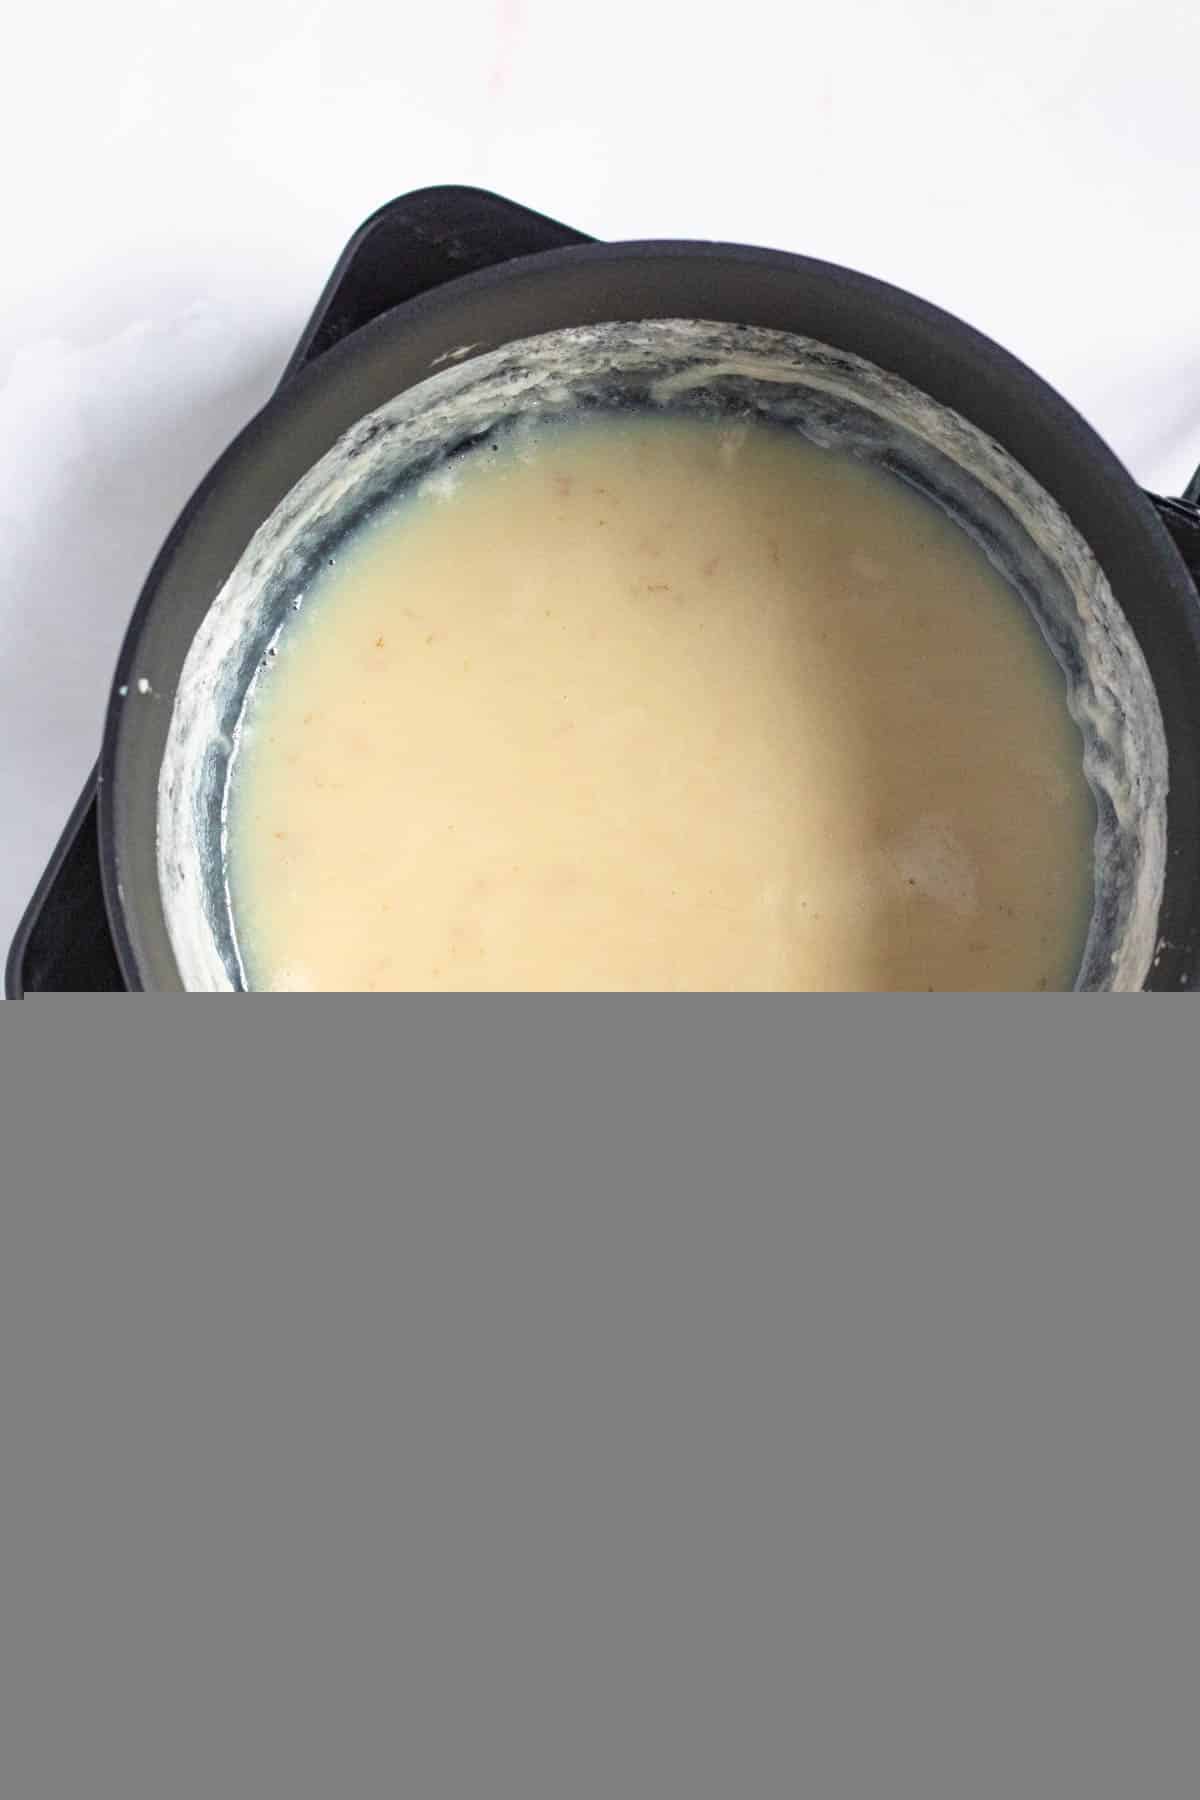 medium sized pot with whole milk and sugar combined and golden brown with a light colored background